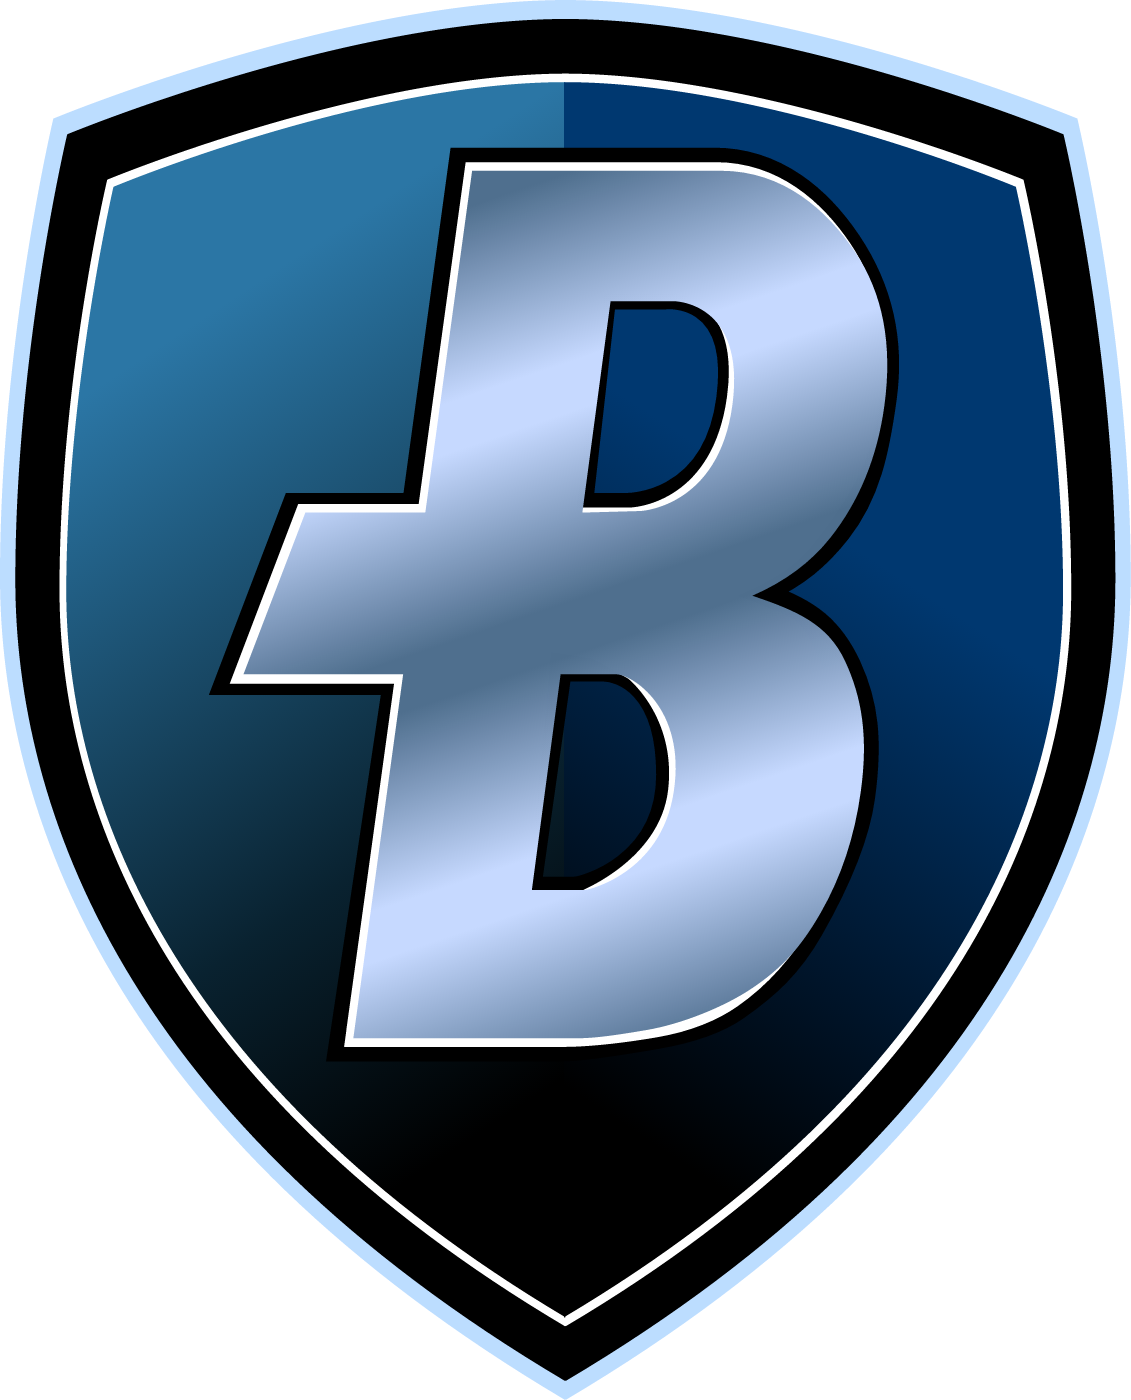 I Tried Making A High Res Version Of The Bluecoats Logo Drumcorps